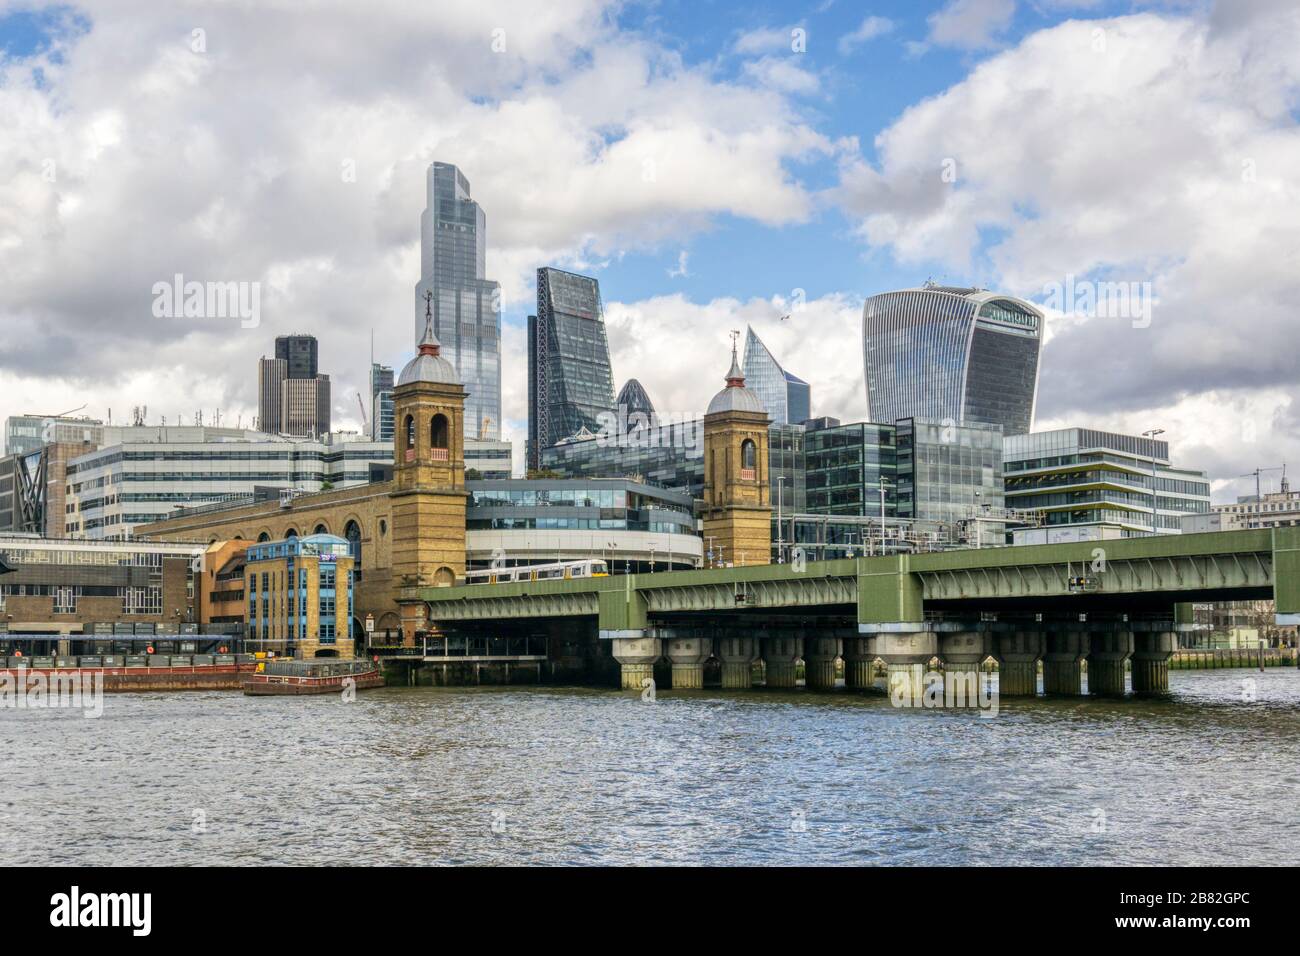 High rise office buildings of the City of London seen over the towers of Cannon Street Station. Stock Photo